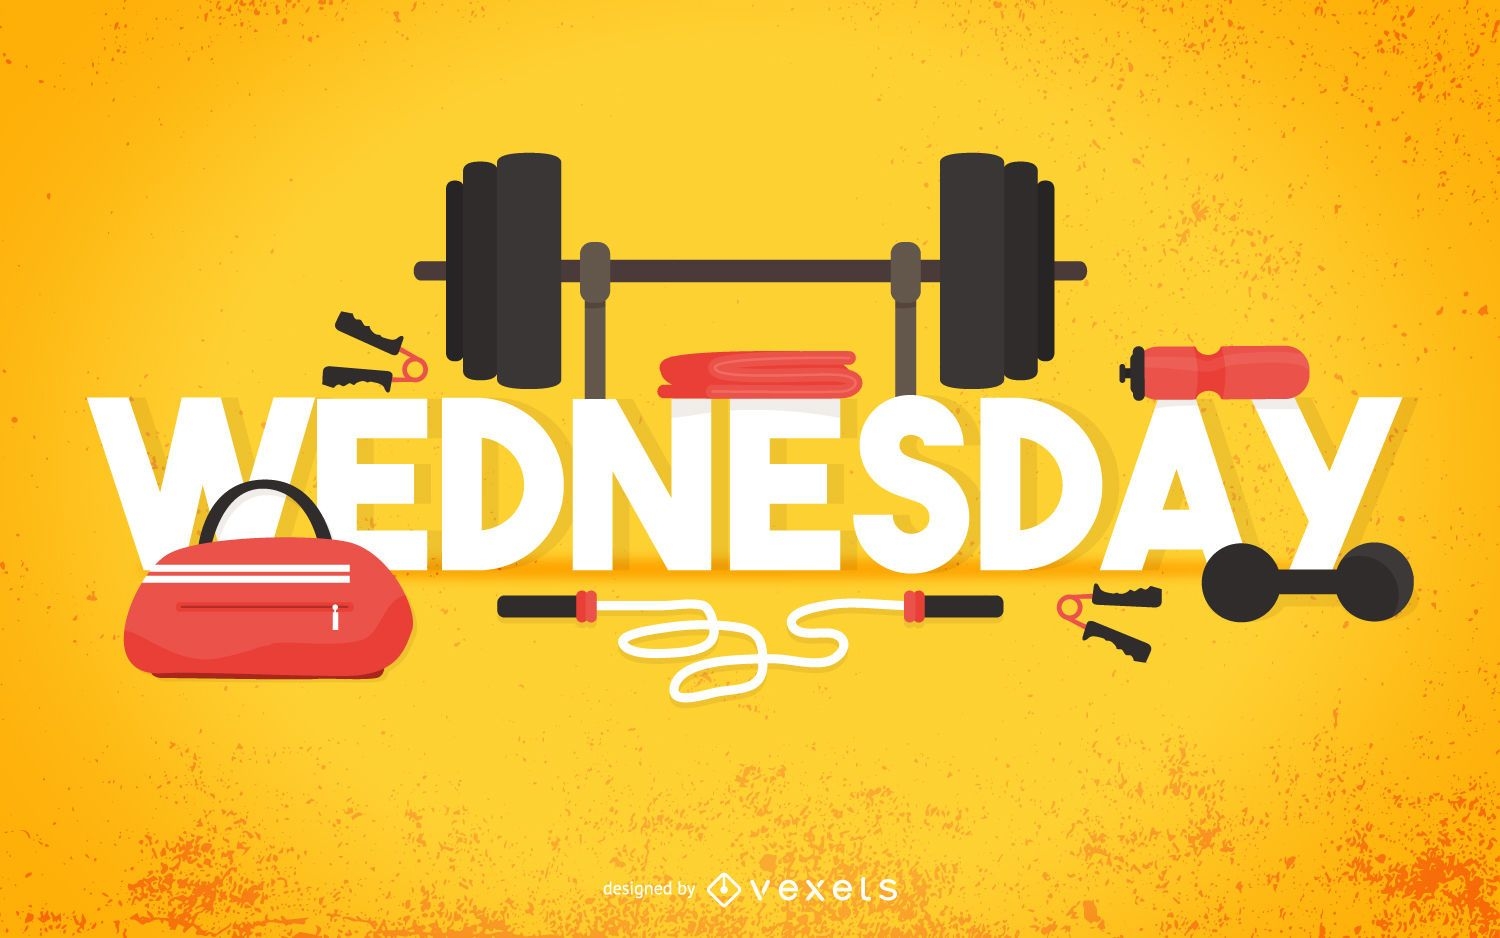 https://images.vexels.com/content/78519/preview/wednesday-gym-illustration-8e9857.png